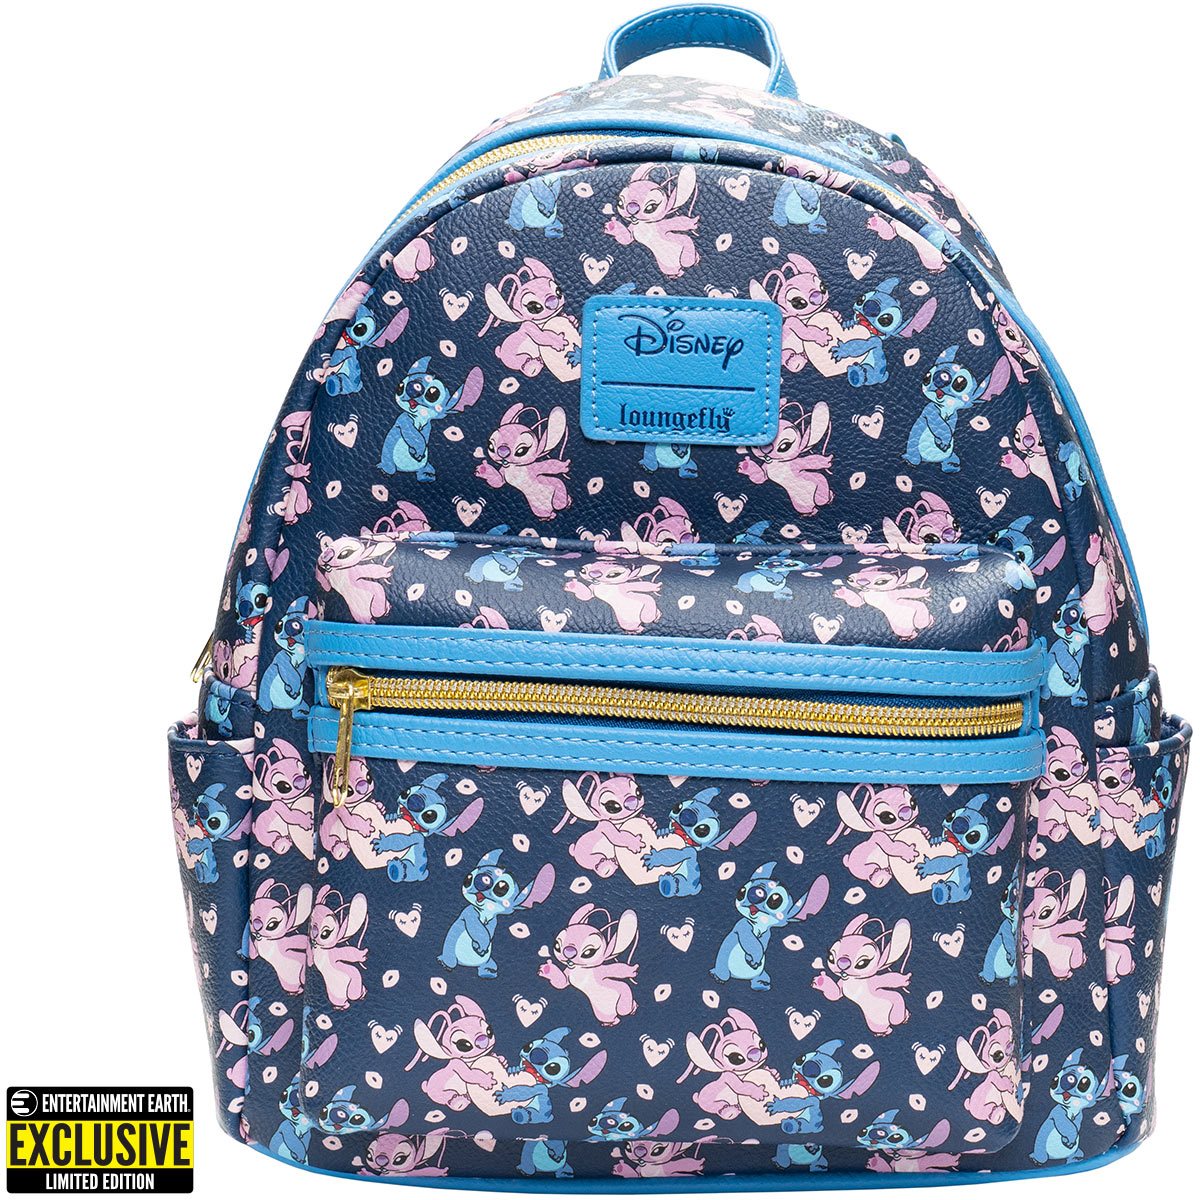 Disney Lilo and Stitch Backpack Set for Kids - Bundle with Stitch Backpack  with Tsum Tsum Stickers and More (Girls Backpack Elementary School)